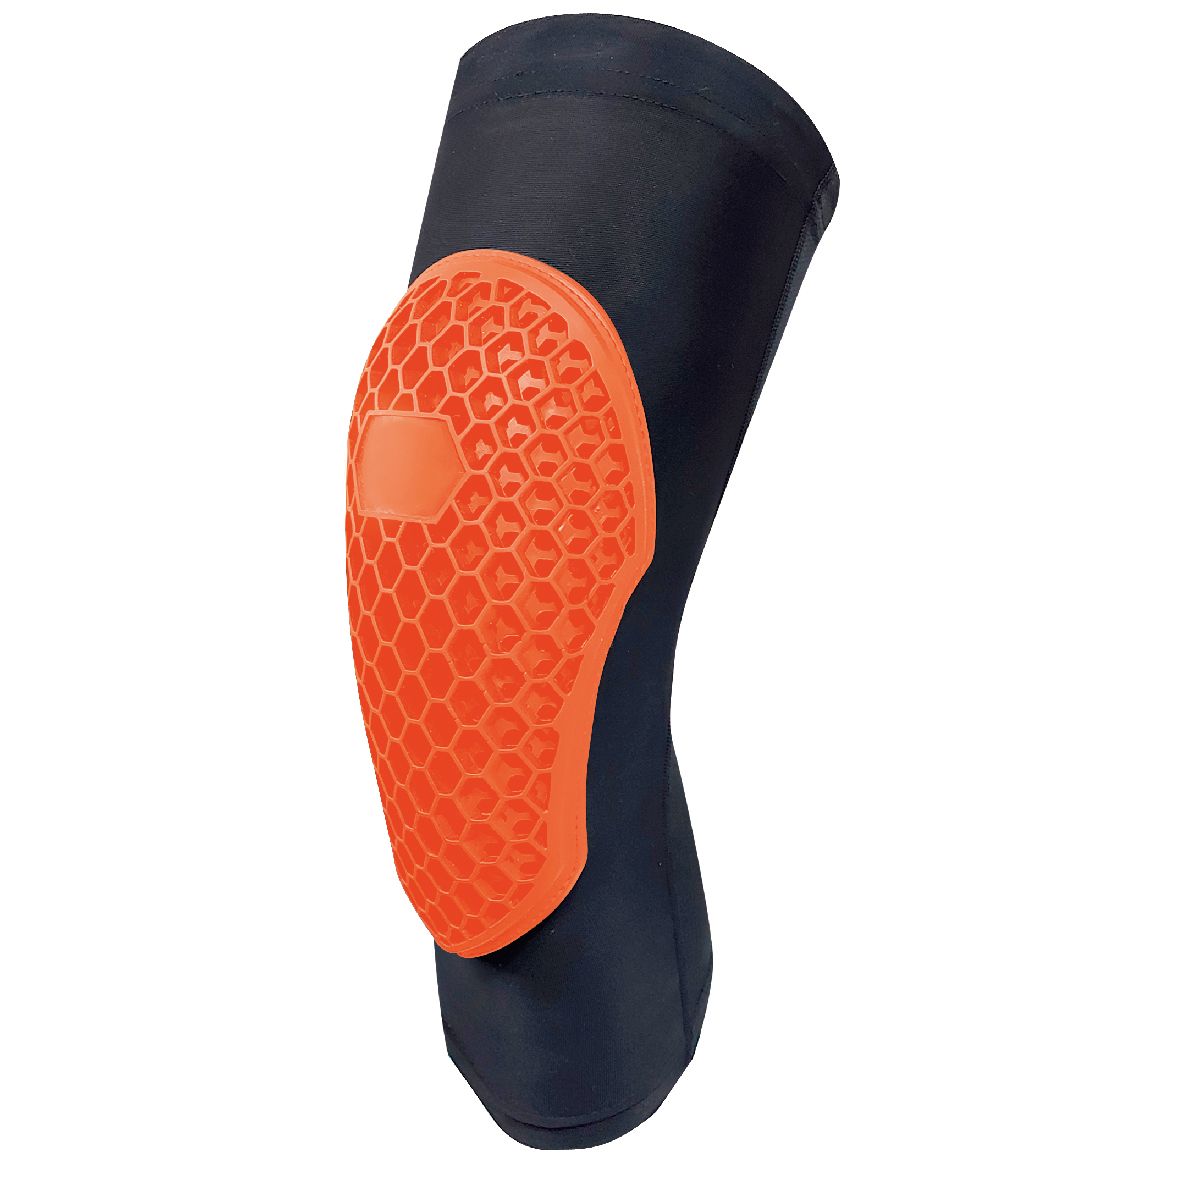 VAPP-injection Knee Sleeves G817L